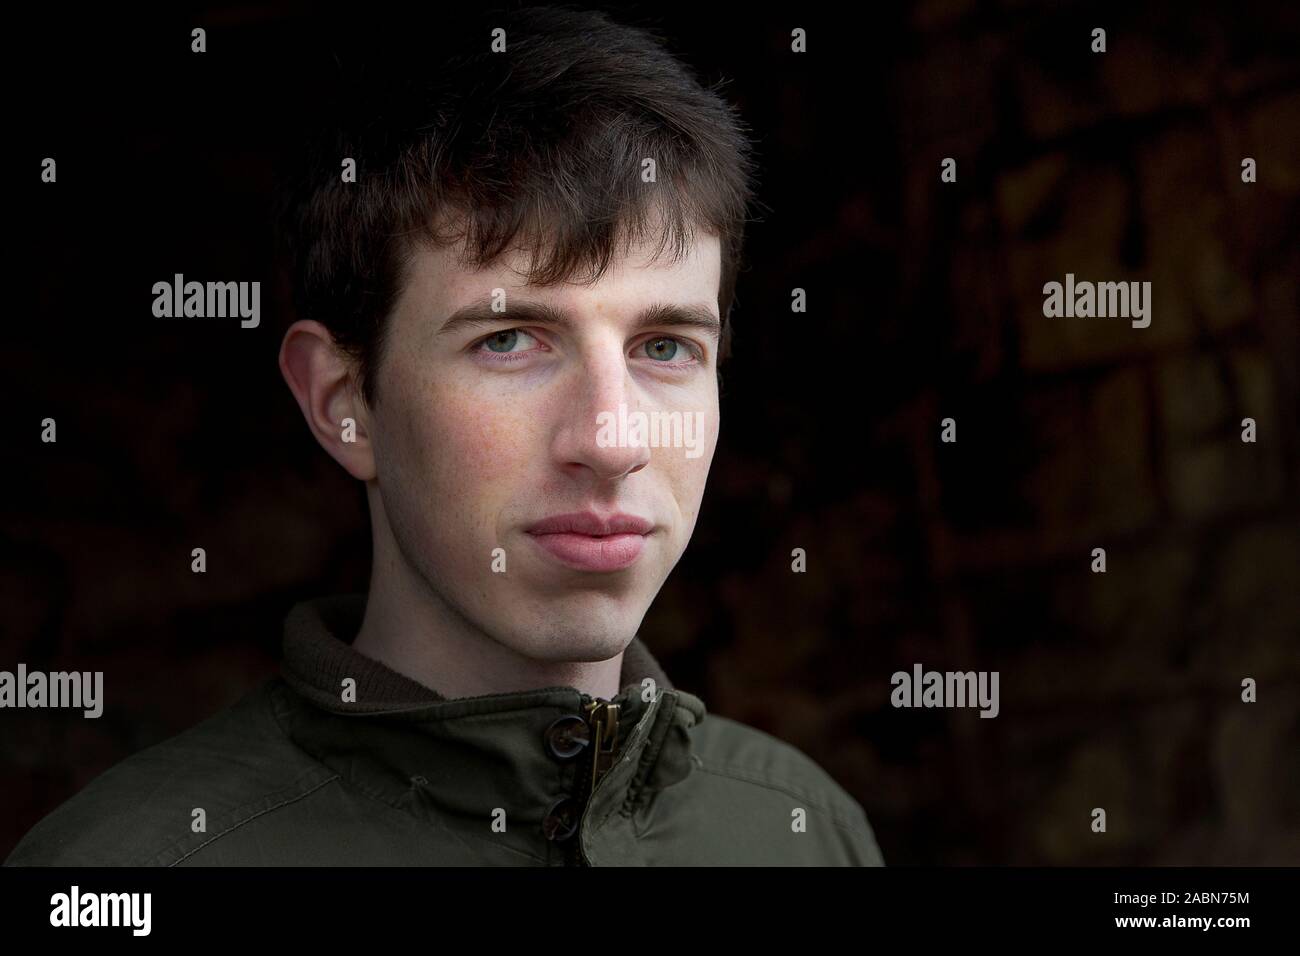 Head shot of a handsome young man in his early twenties or late teens against a dark background. Stock Photo